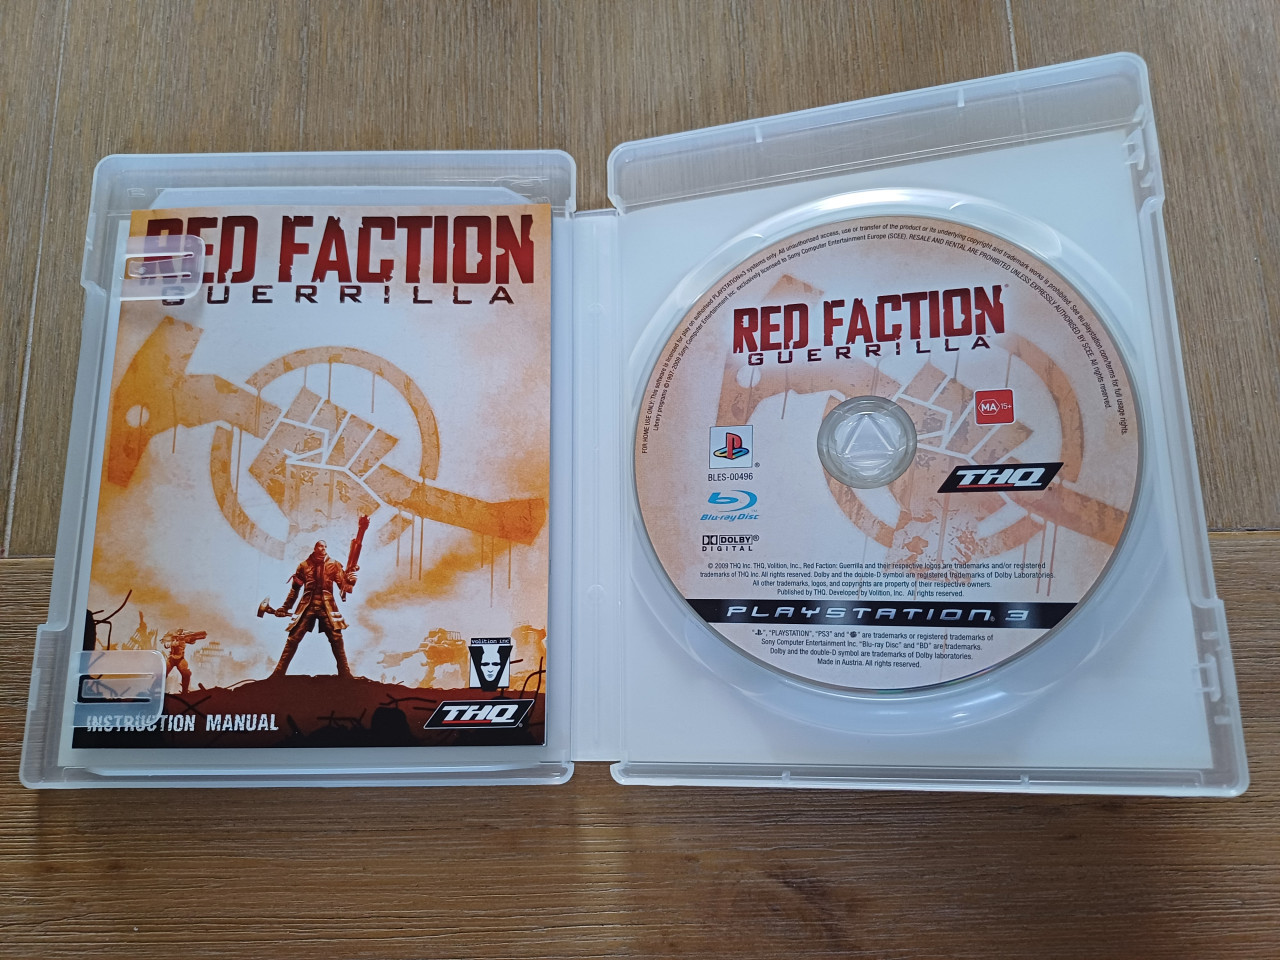 Red faction guerilla ps3